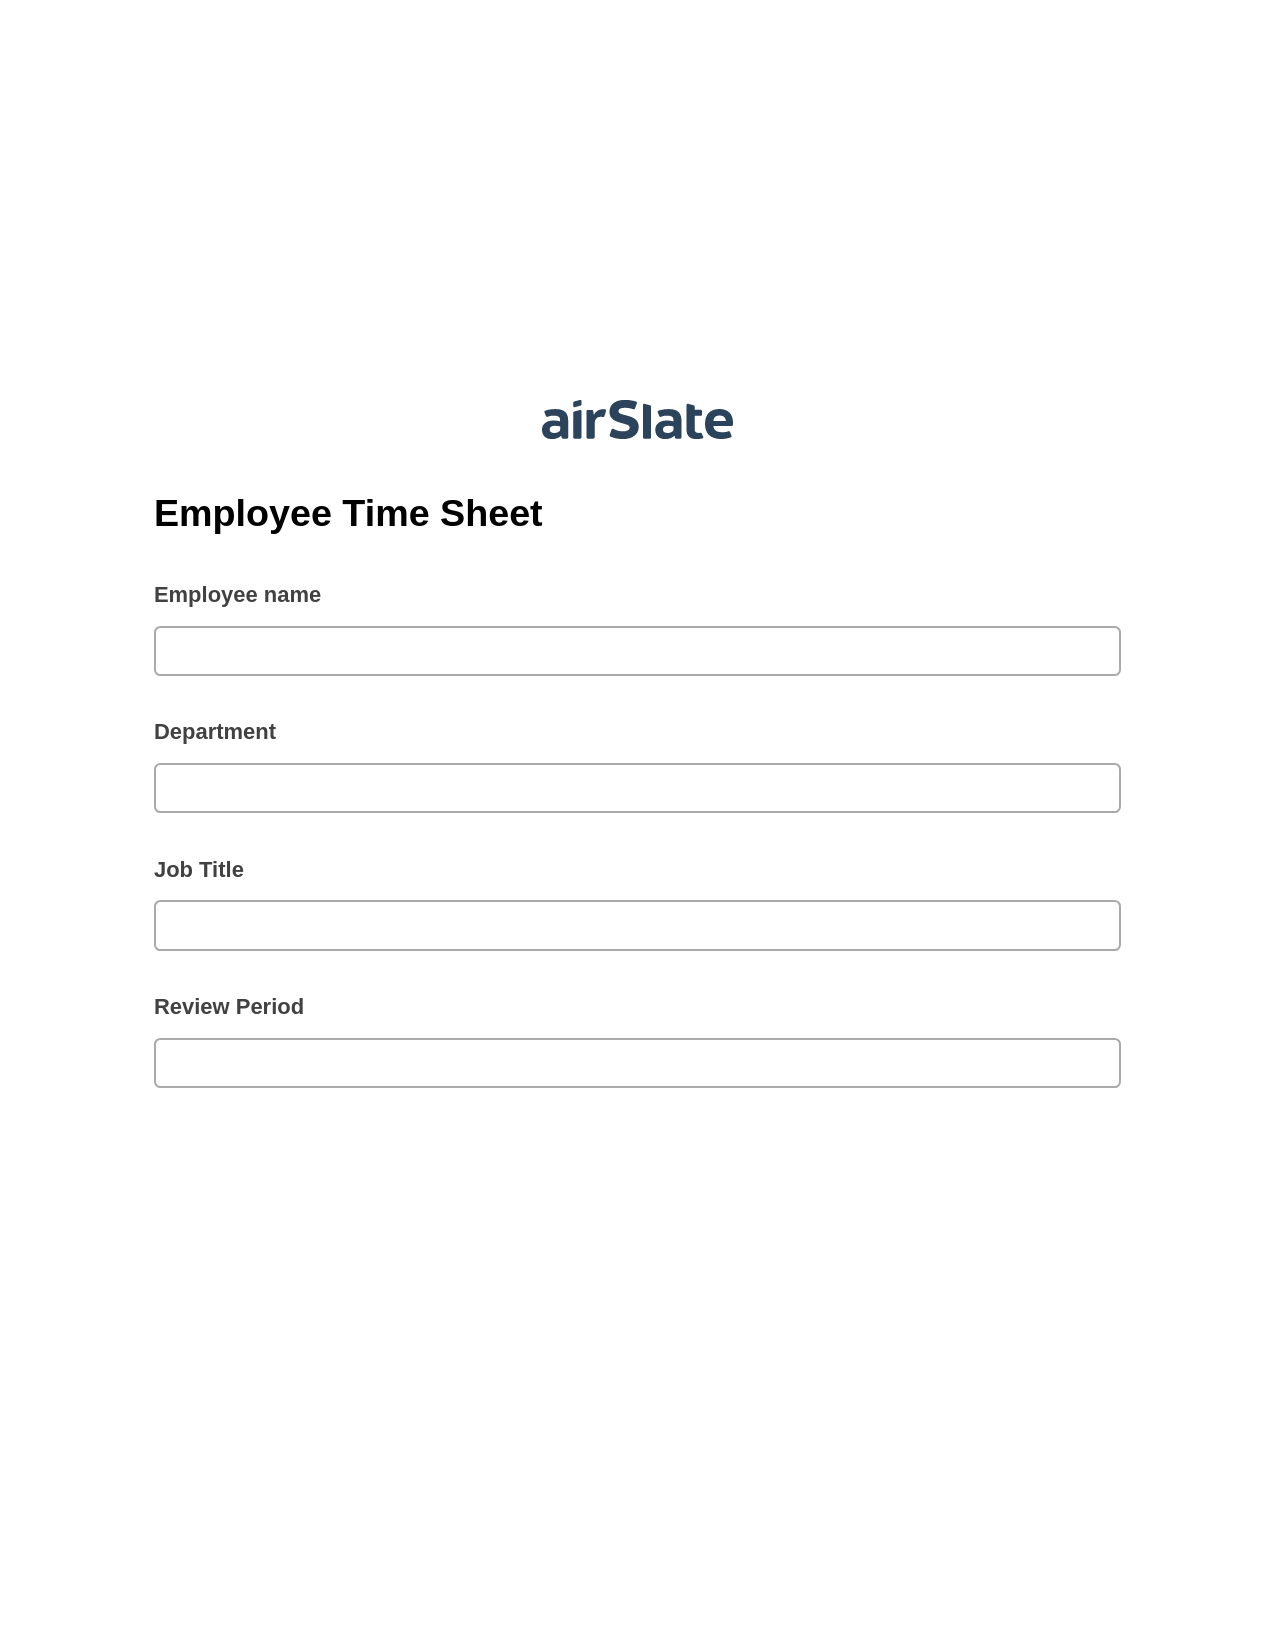 Employee Time Sheet Pre-fill from Office 365 Excel Bot, Create Salesforce Records Bot, Archive to SharePoint Folder Bot